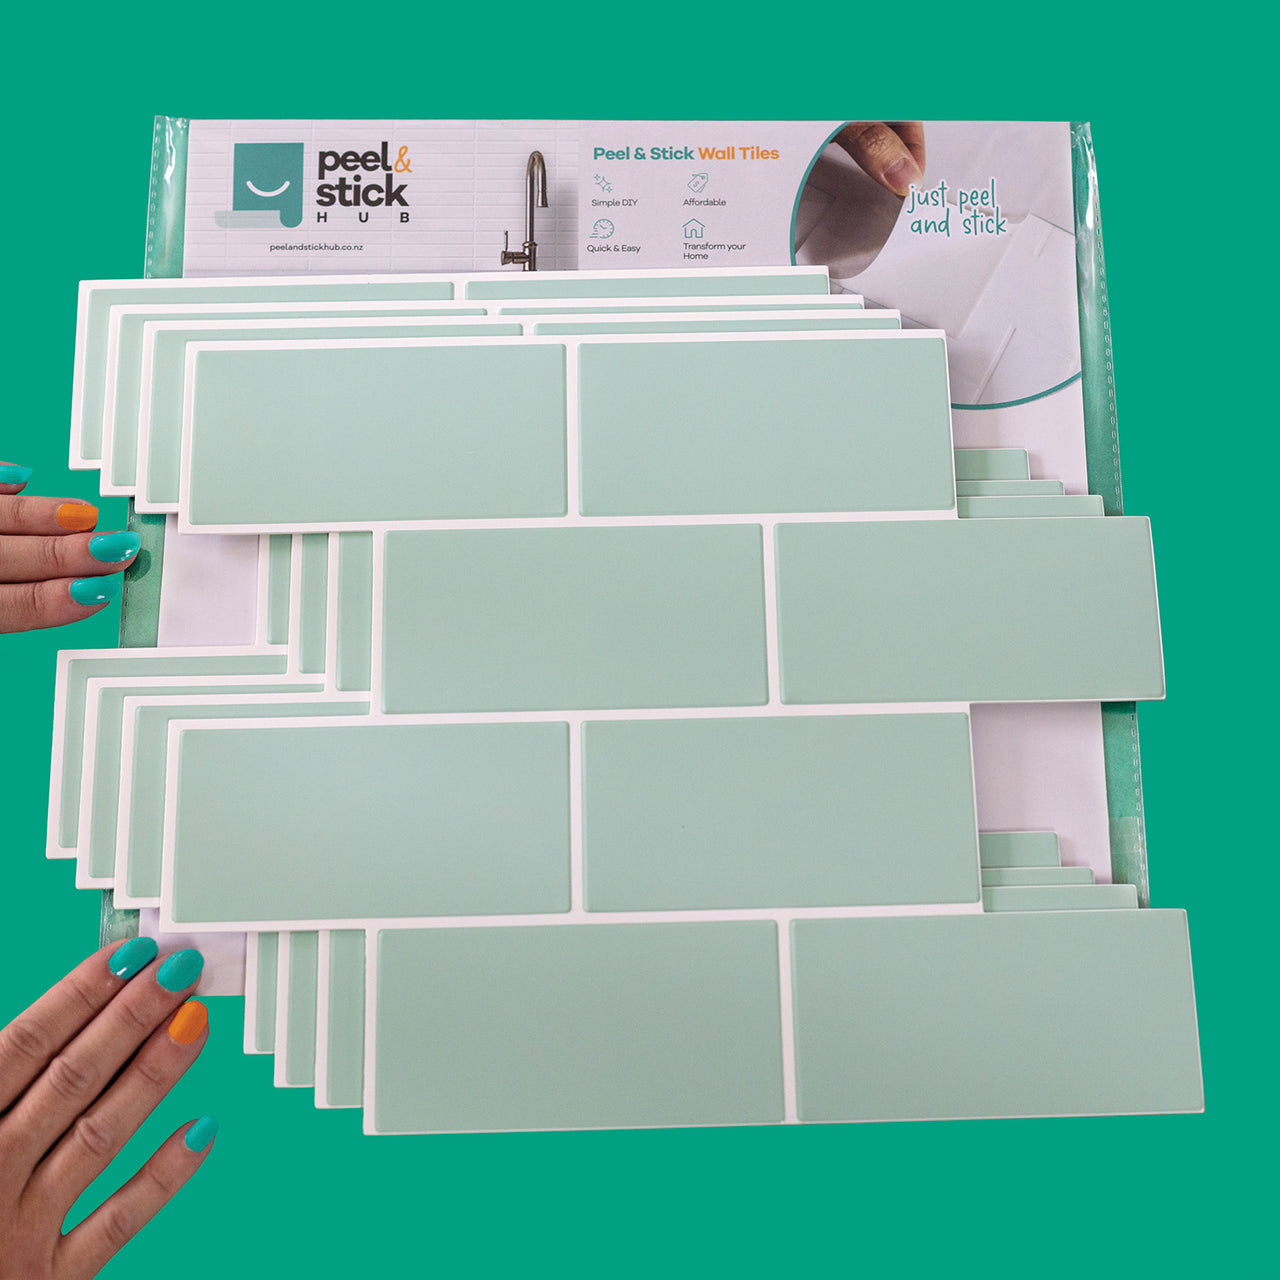 A package of 4 mint green subway peel and stick vinyl wall tiles